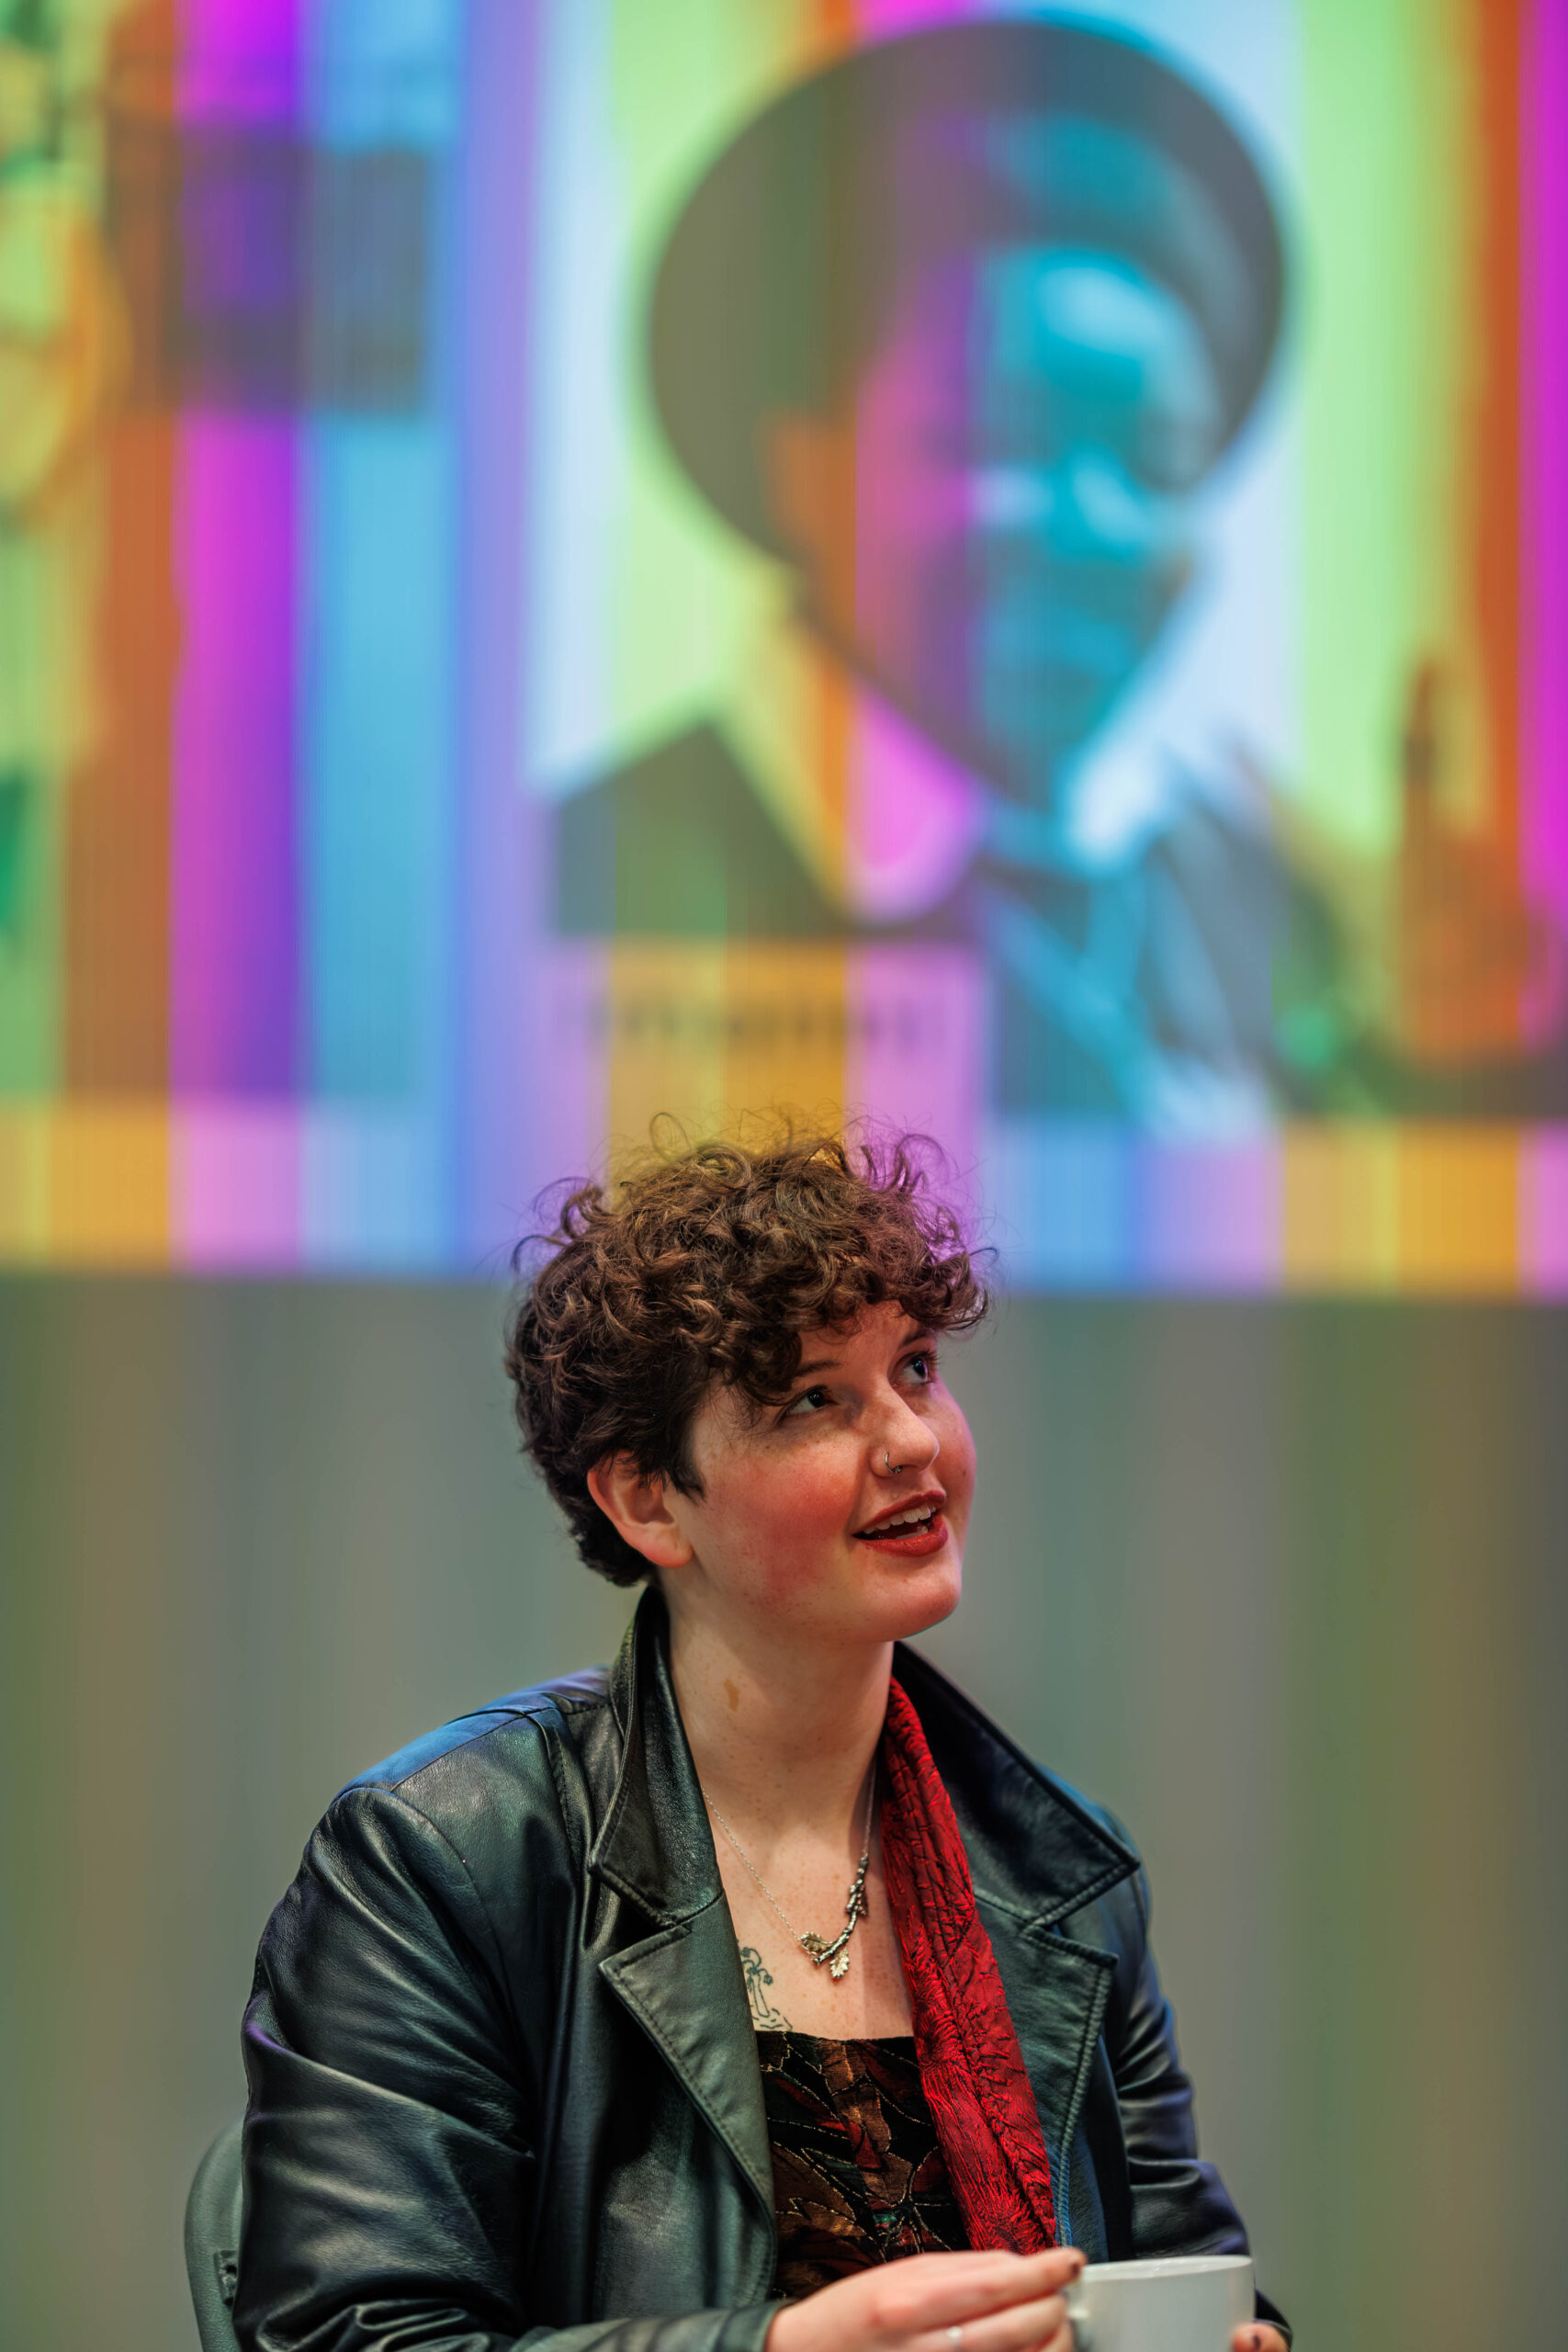 Panellist Kai sits in the Nell Gwynne Studio in a leather coat and red scarf. They are holding a mug. In the background a rainbow image is projected onto a wall. 